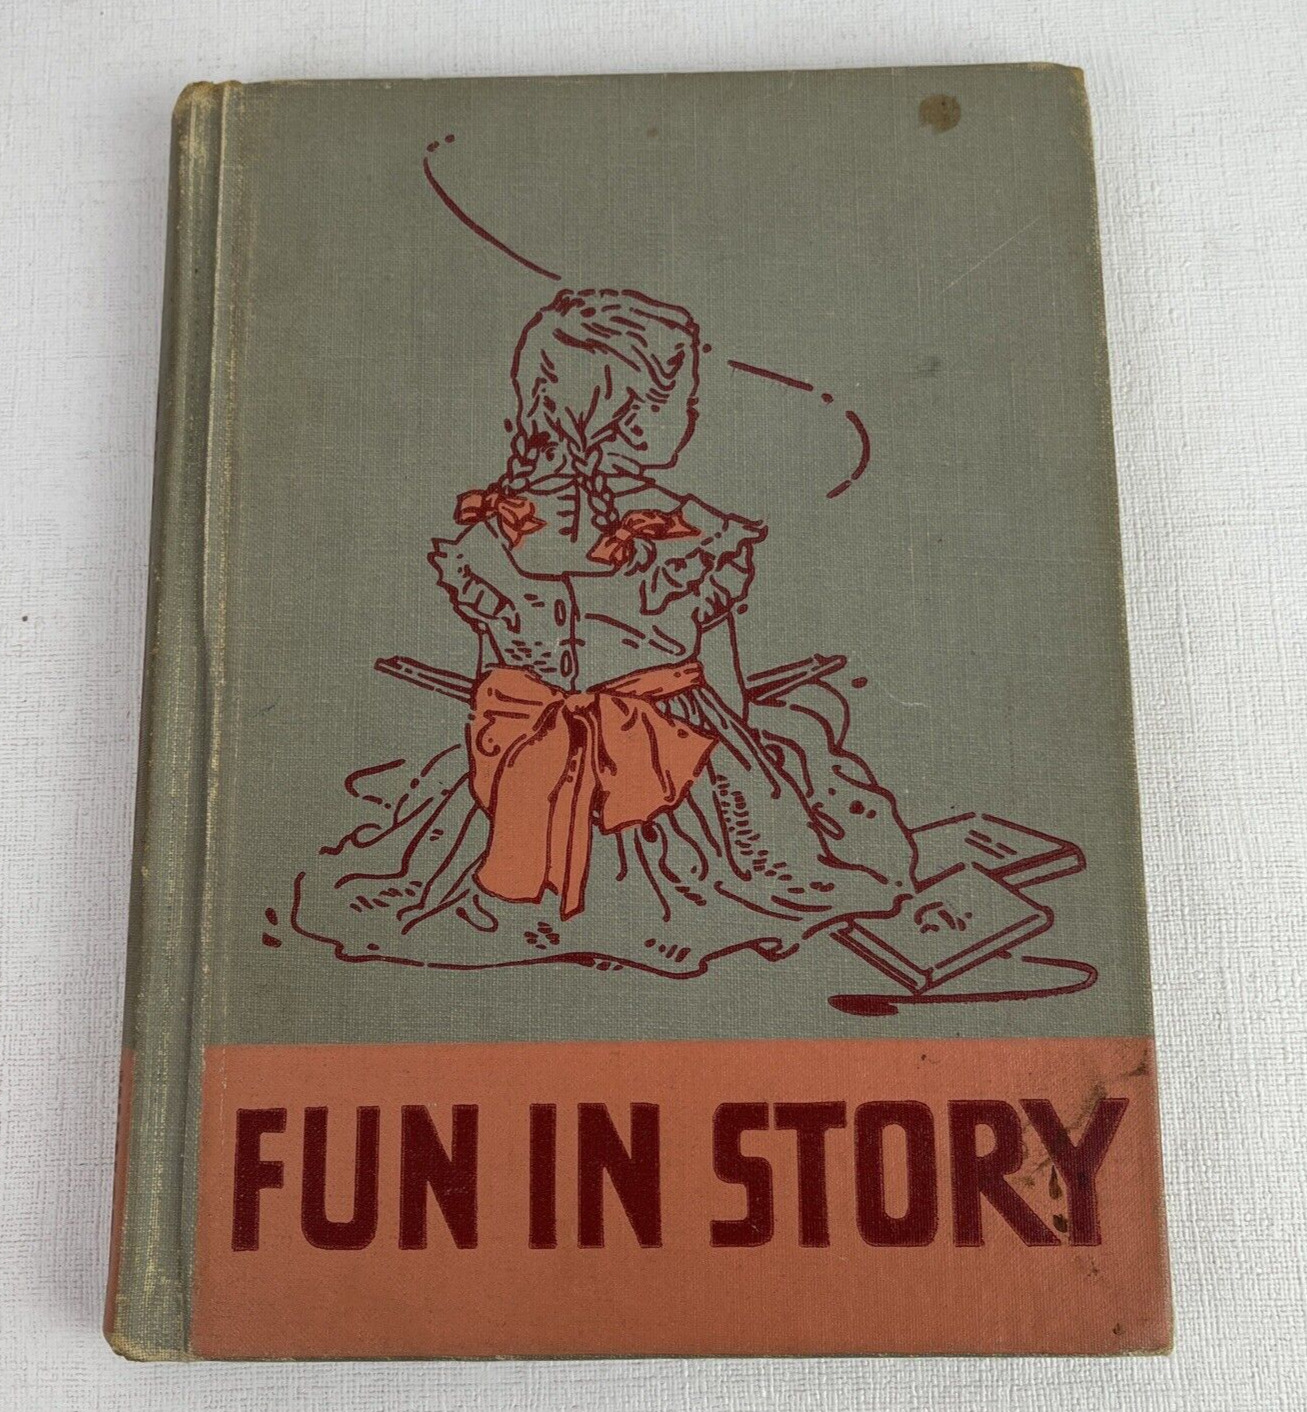 CHILDRENS VINTAGE- EASY GROWTH IN READING- FUN IN STORY, GERTRUDE HILDRETH, 1952